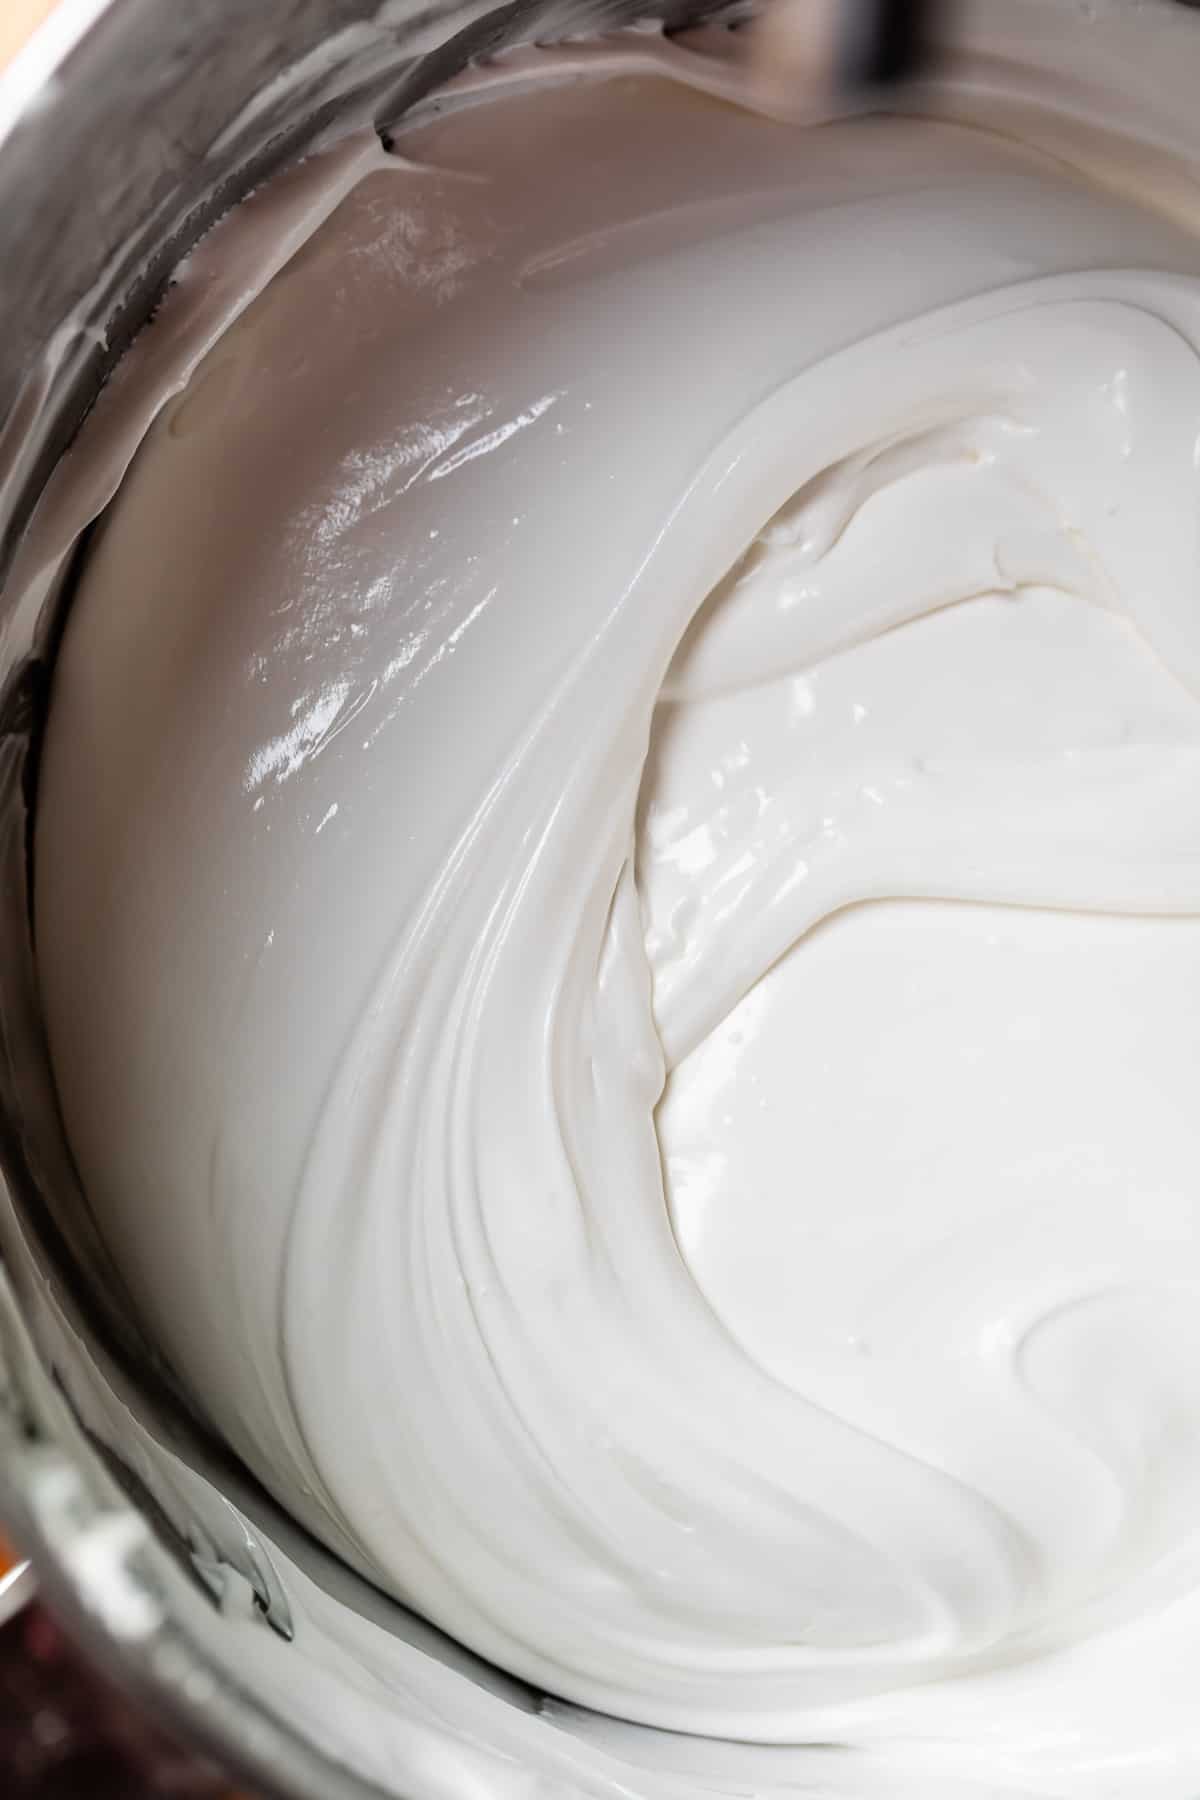 white toothpaste like consistency icing in a metal kitchen aid mixing bowl.